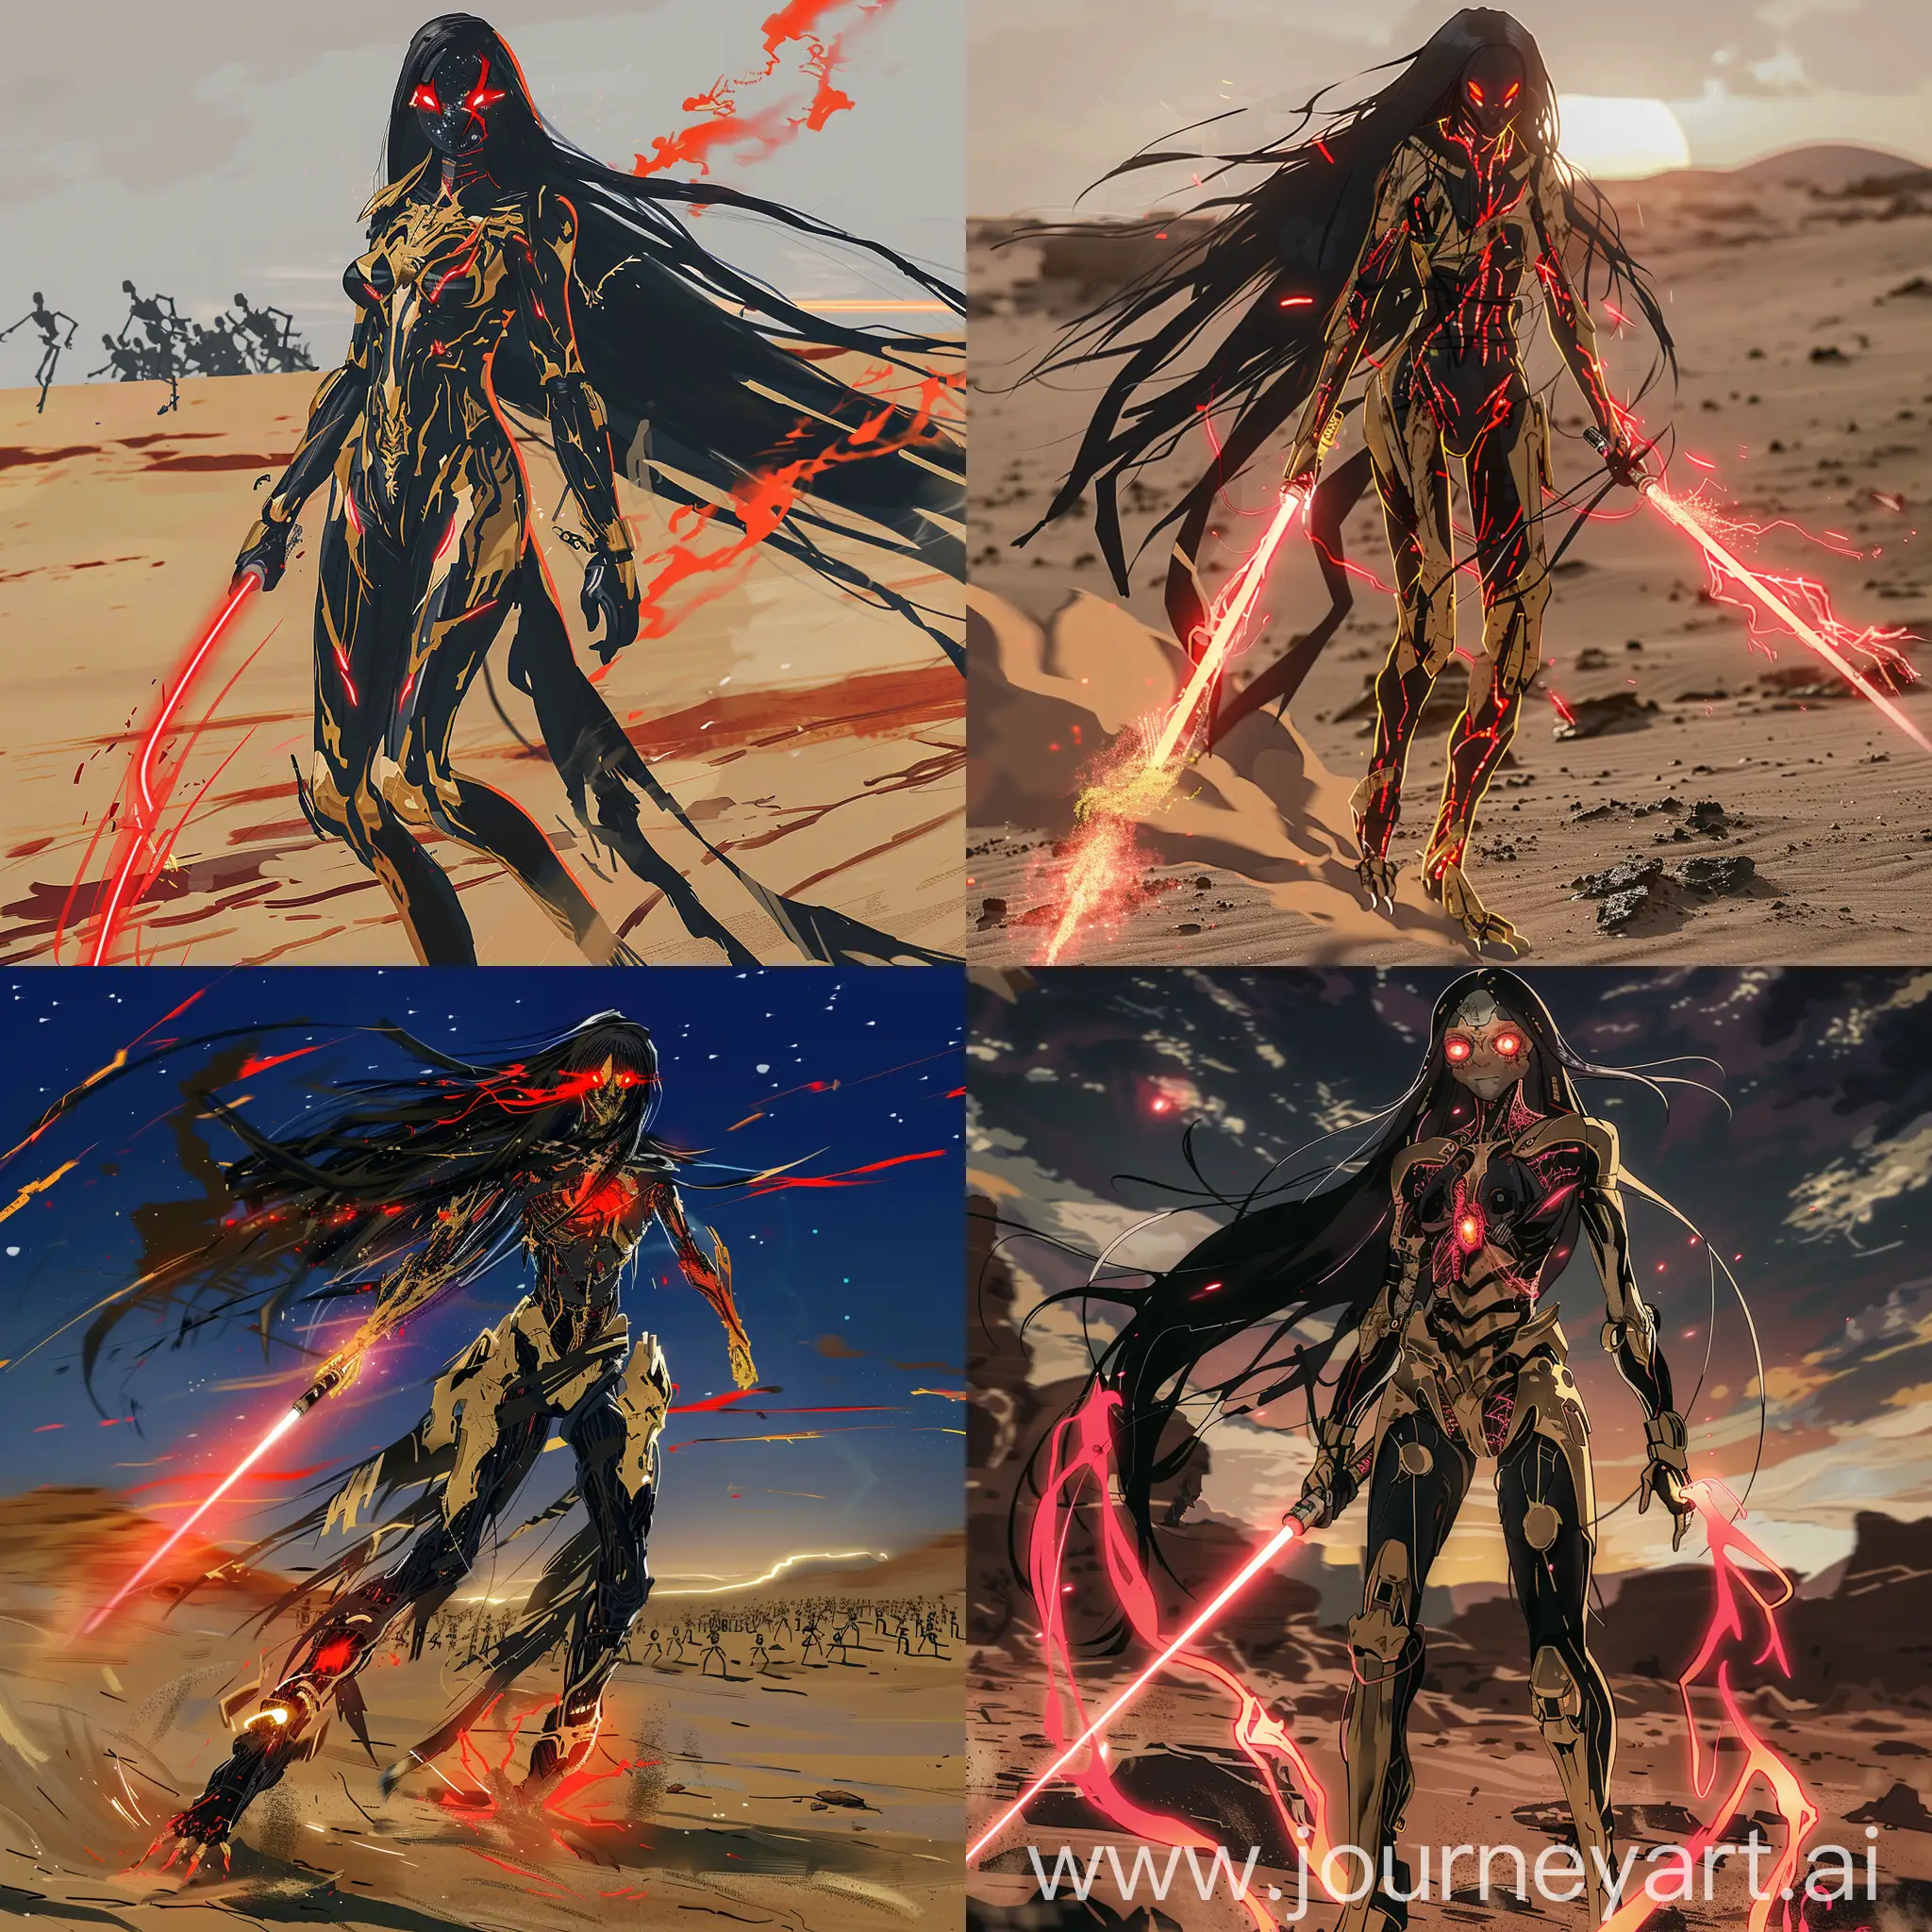 vivid colors, long exposure, full body, panoramic capture, a woman with long black hair and glowing red eyes, black and gold Digimon wargreymon costume, torn, red flame powers, general pose, walking in the desert, with lightsaber, with energy around him, commanding an army of skeletons, pulp manga sketch art style, night